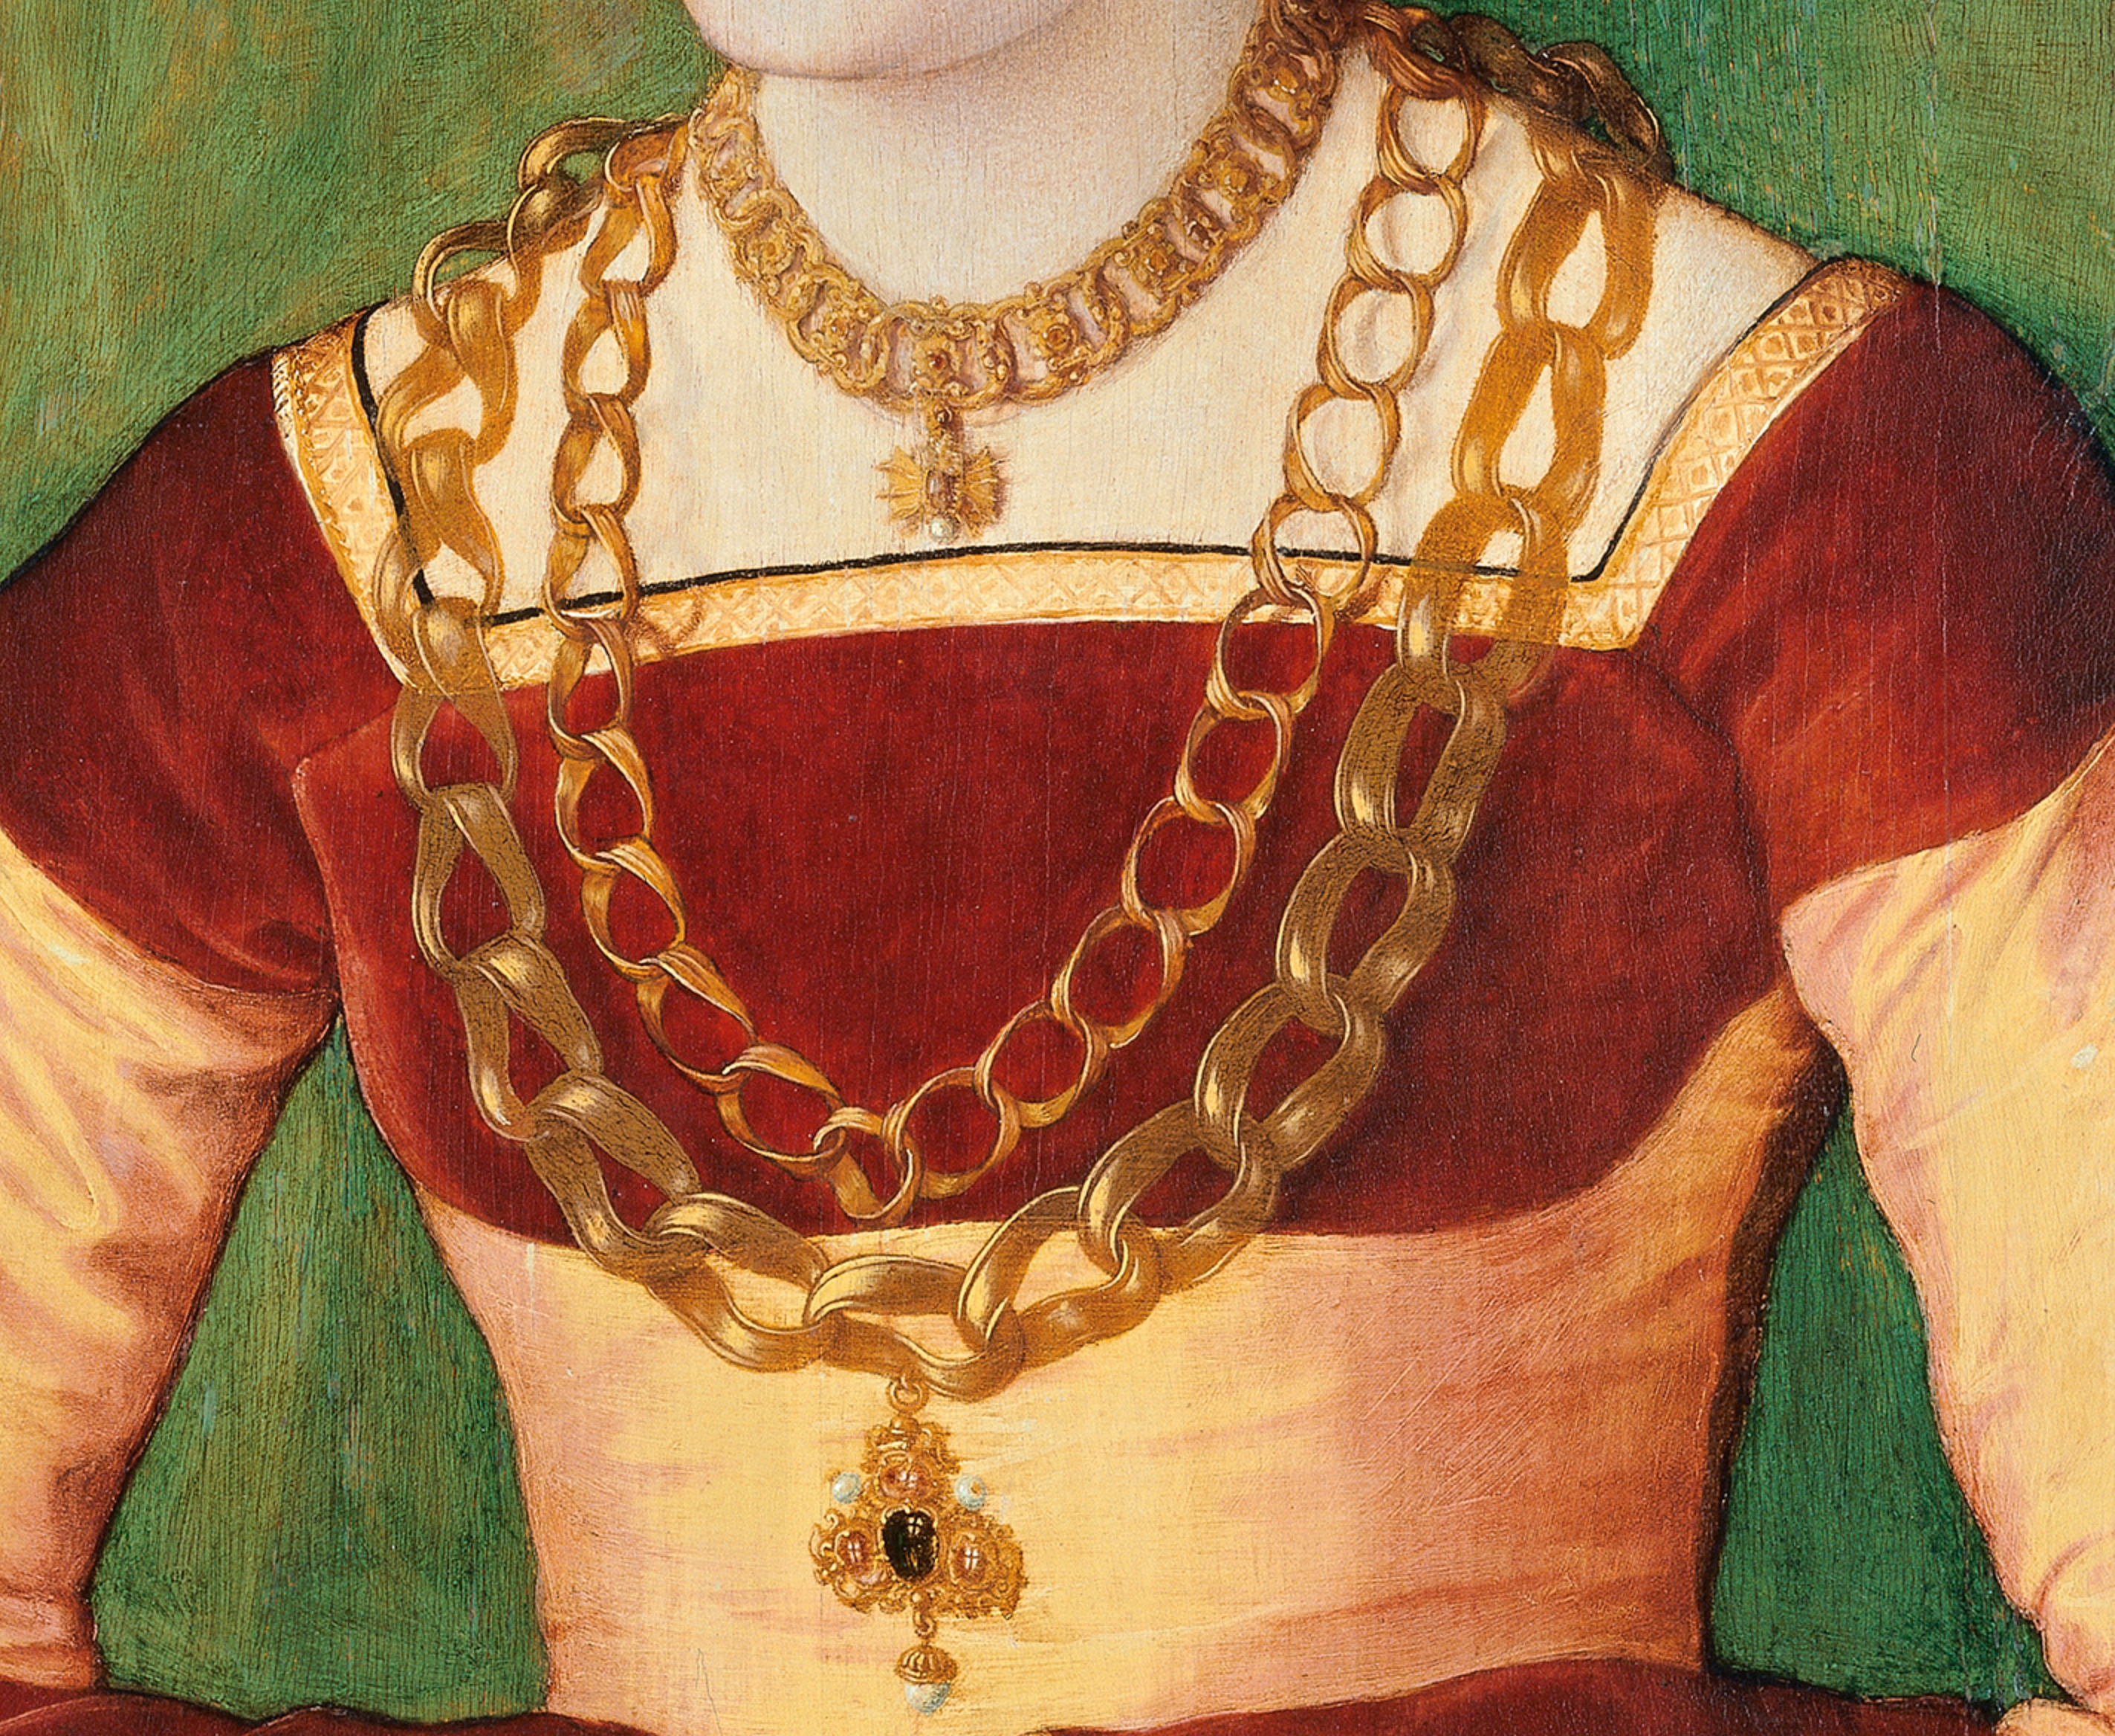 The two bottom chains are cable chains. Ursula Rudolph by Barthel Beham, 1528.